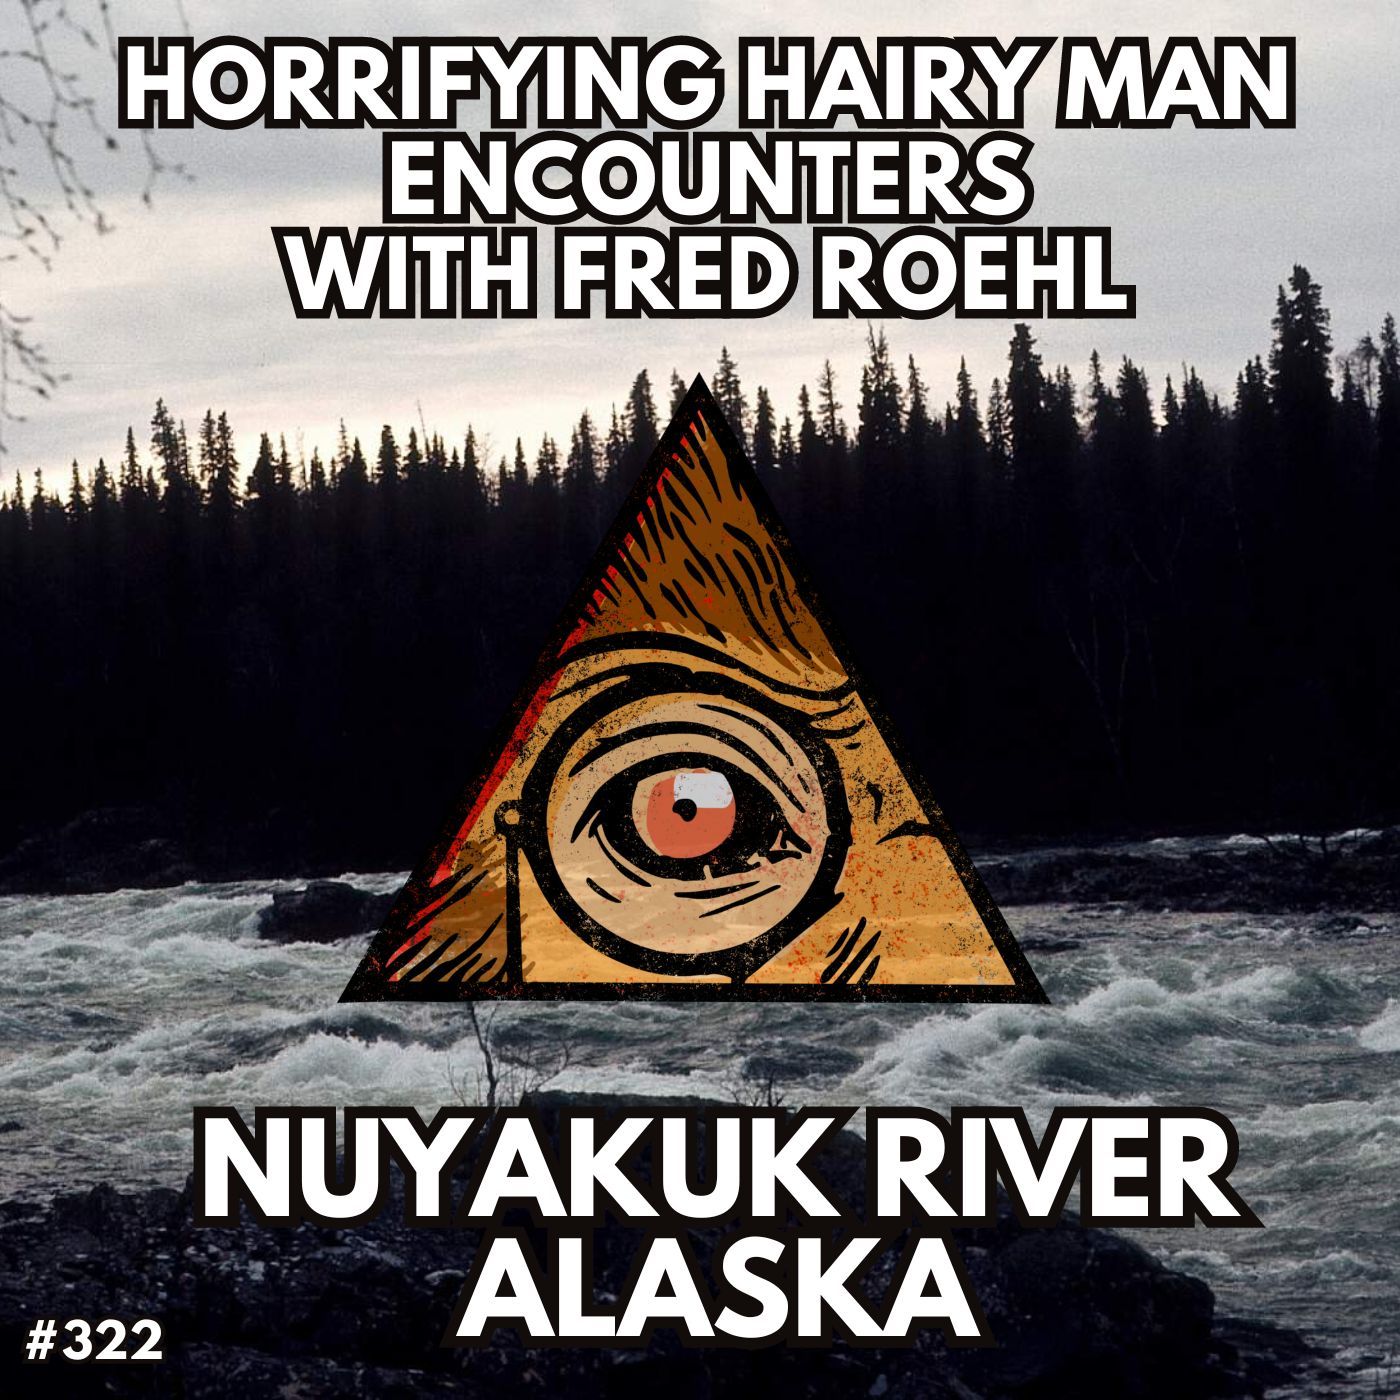 Horrifying Hairy Man Encounters of Alaska with Fred Roehl